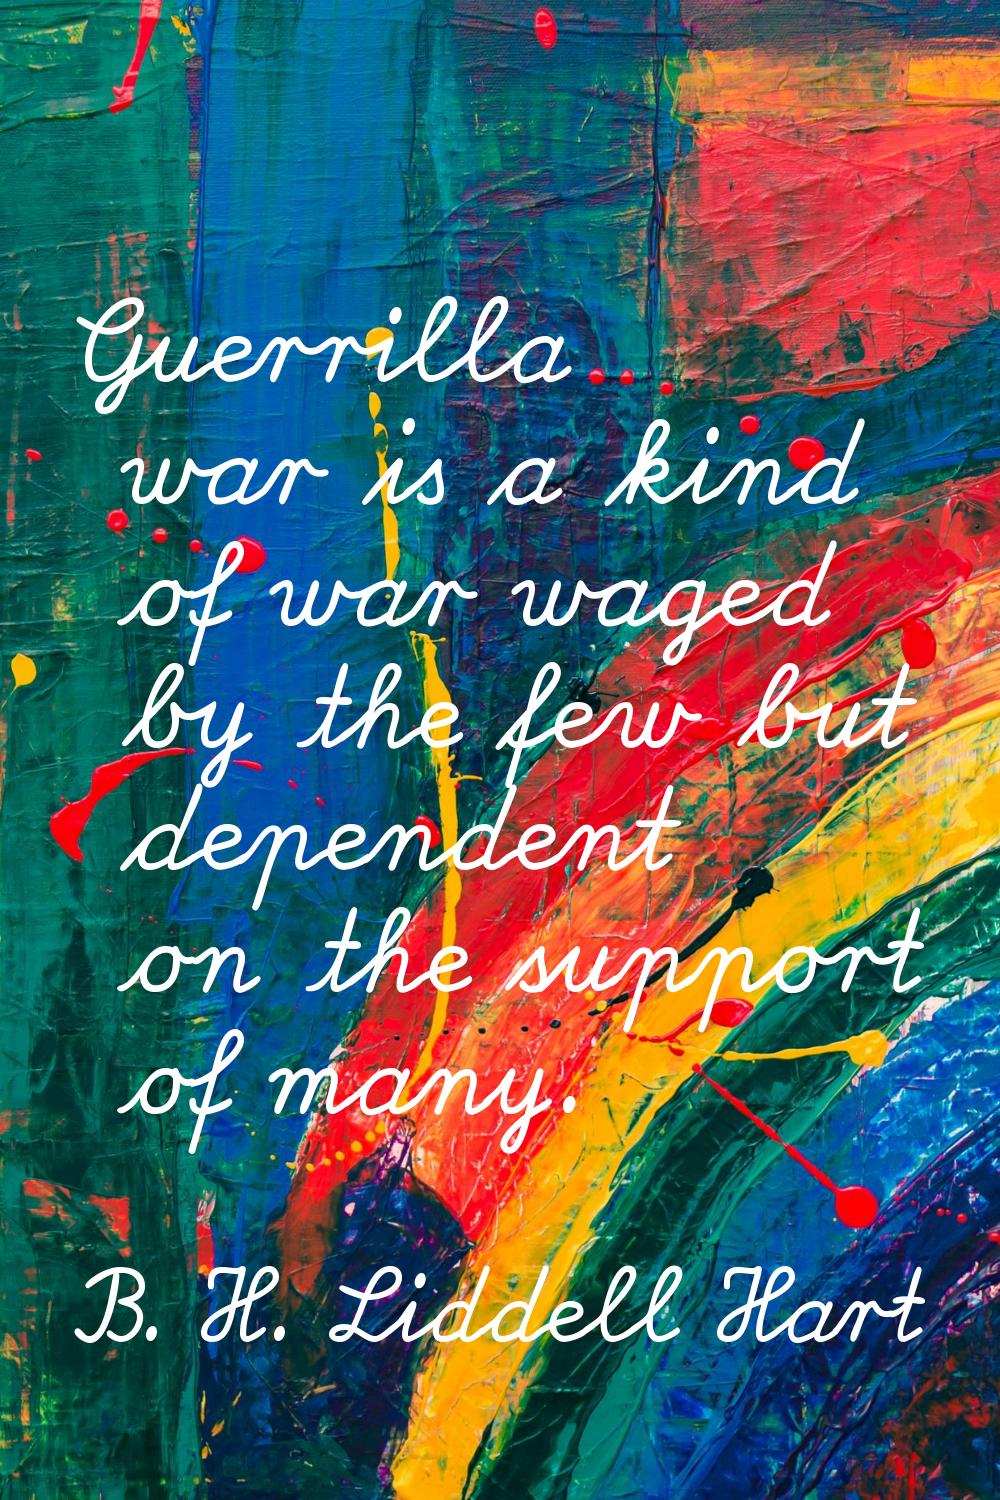 Guerrilla war is a kind of war waged by the few but dependent on the support of many.